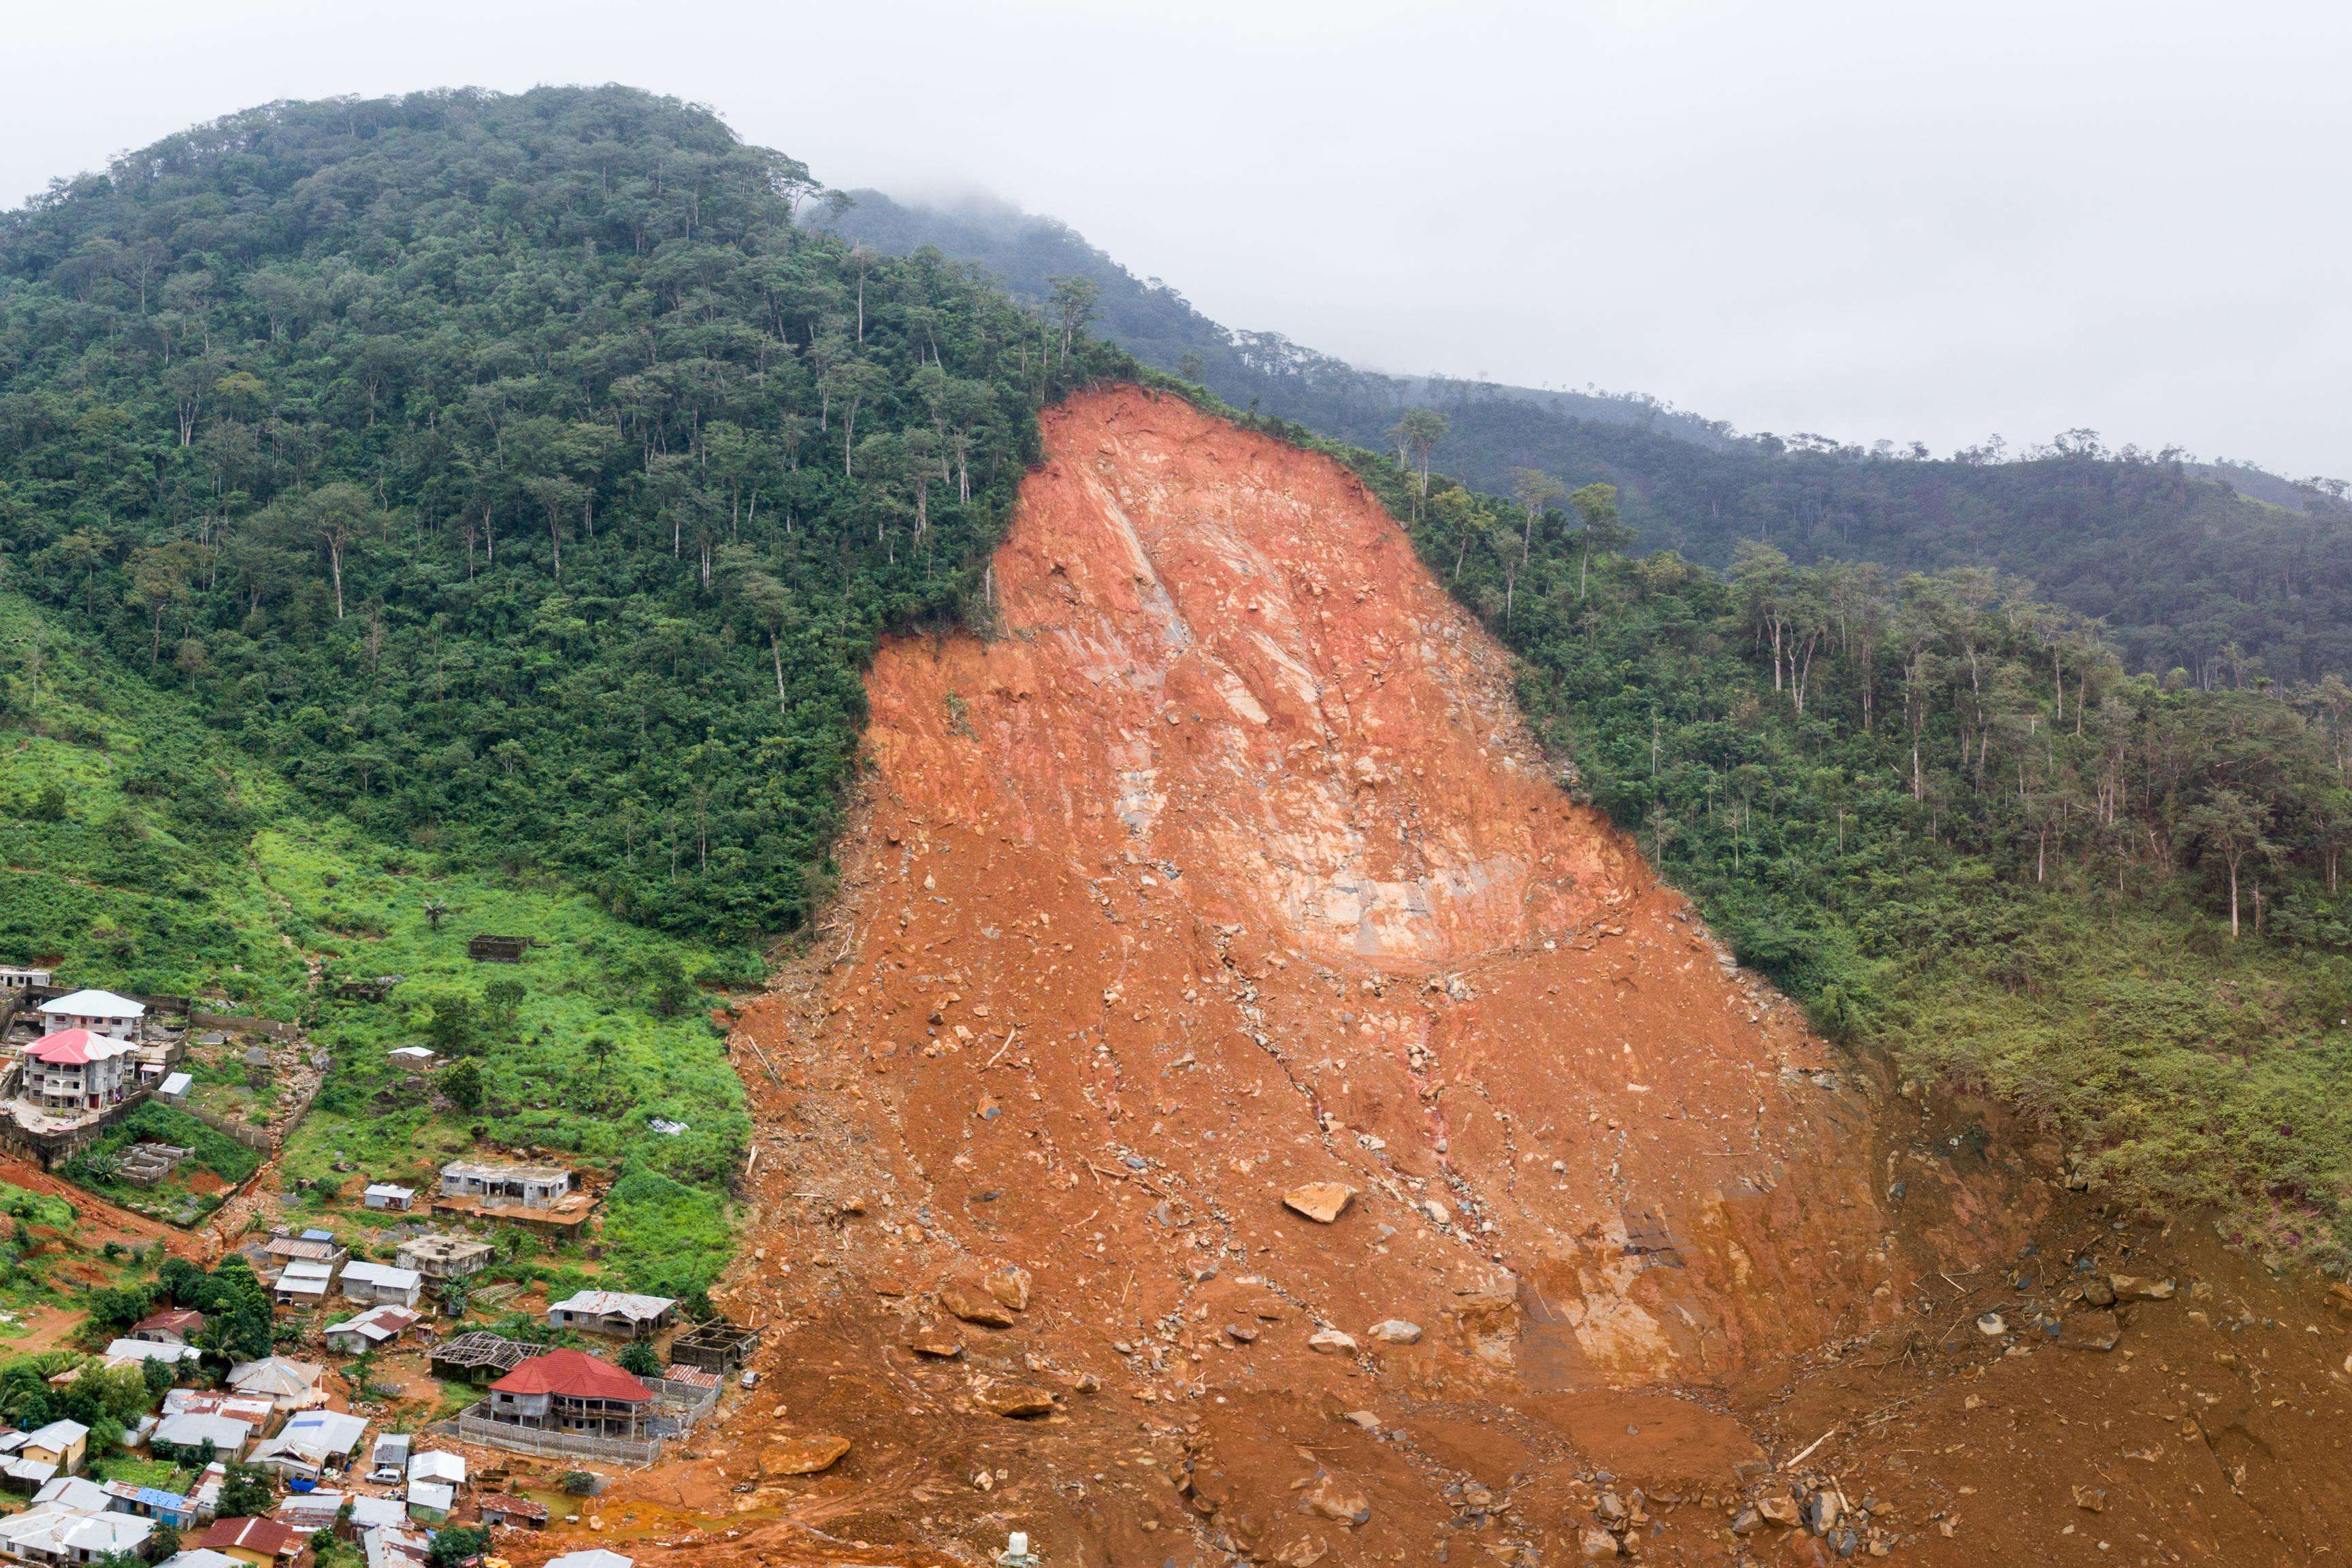 A stitched panoramic drone image showing the aftermath of a mudslide.